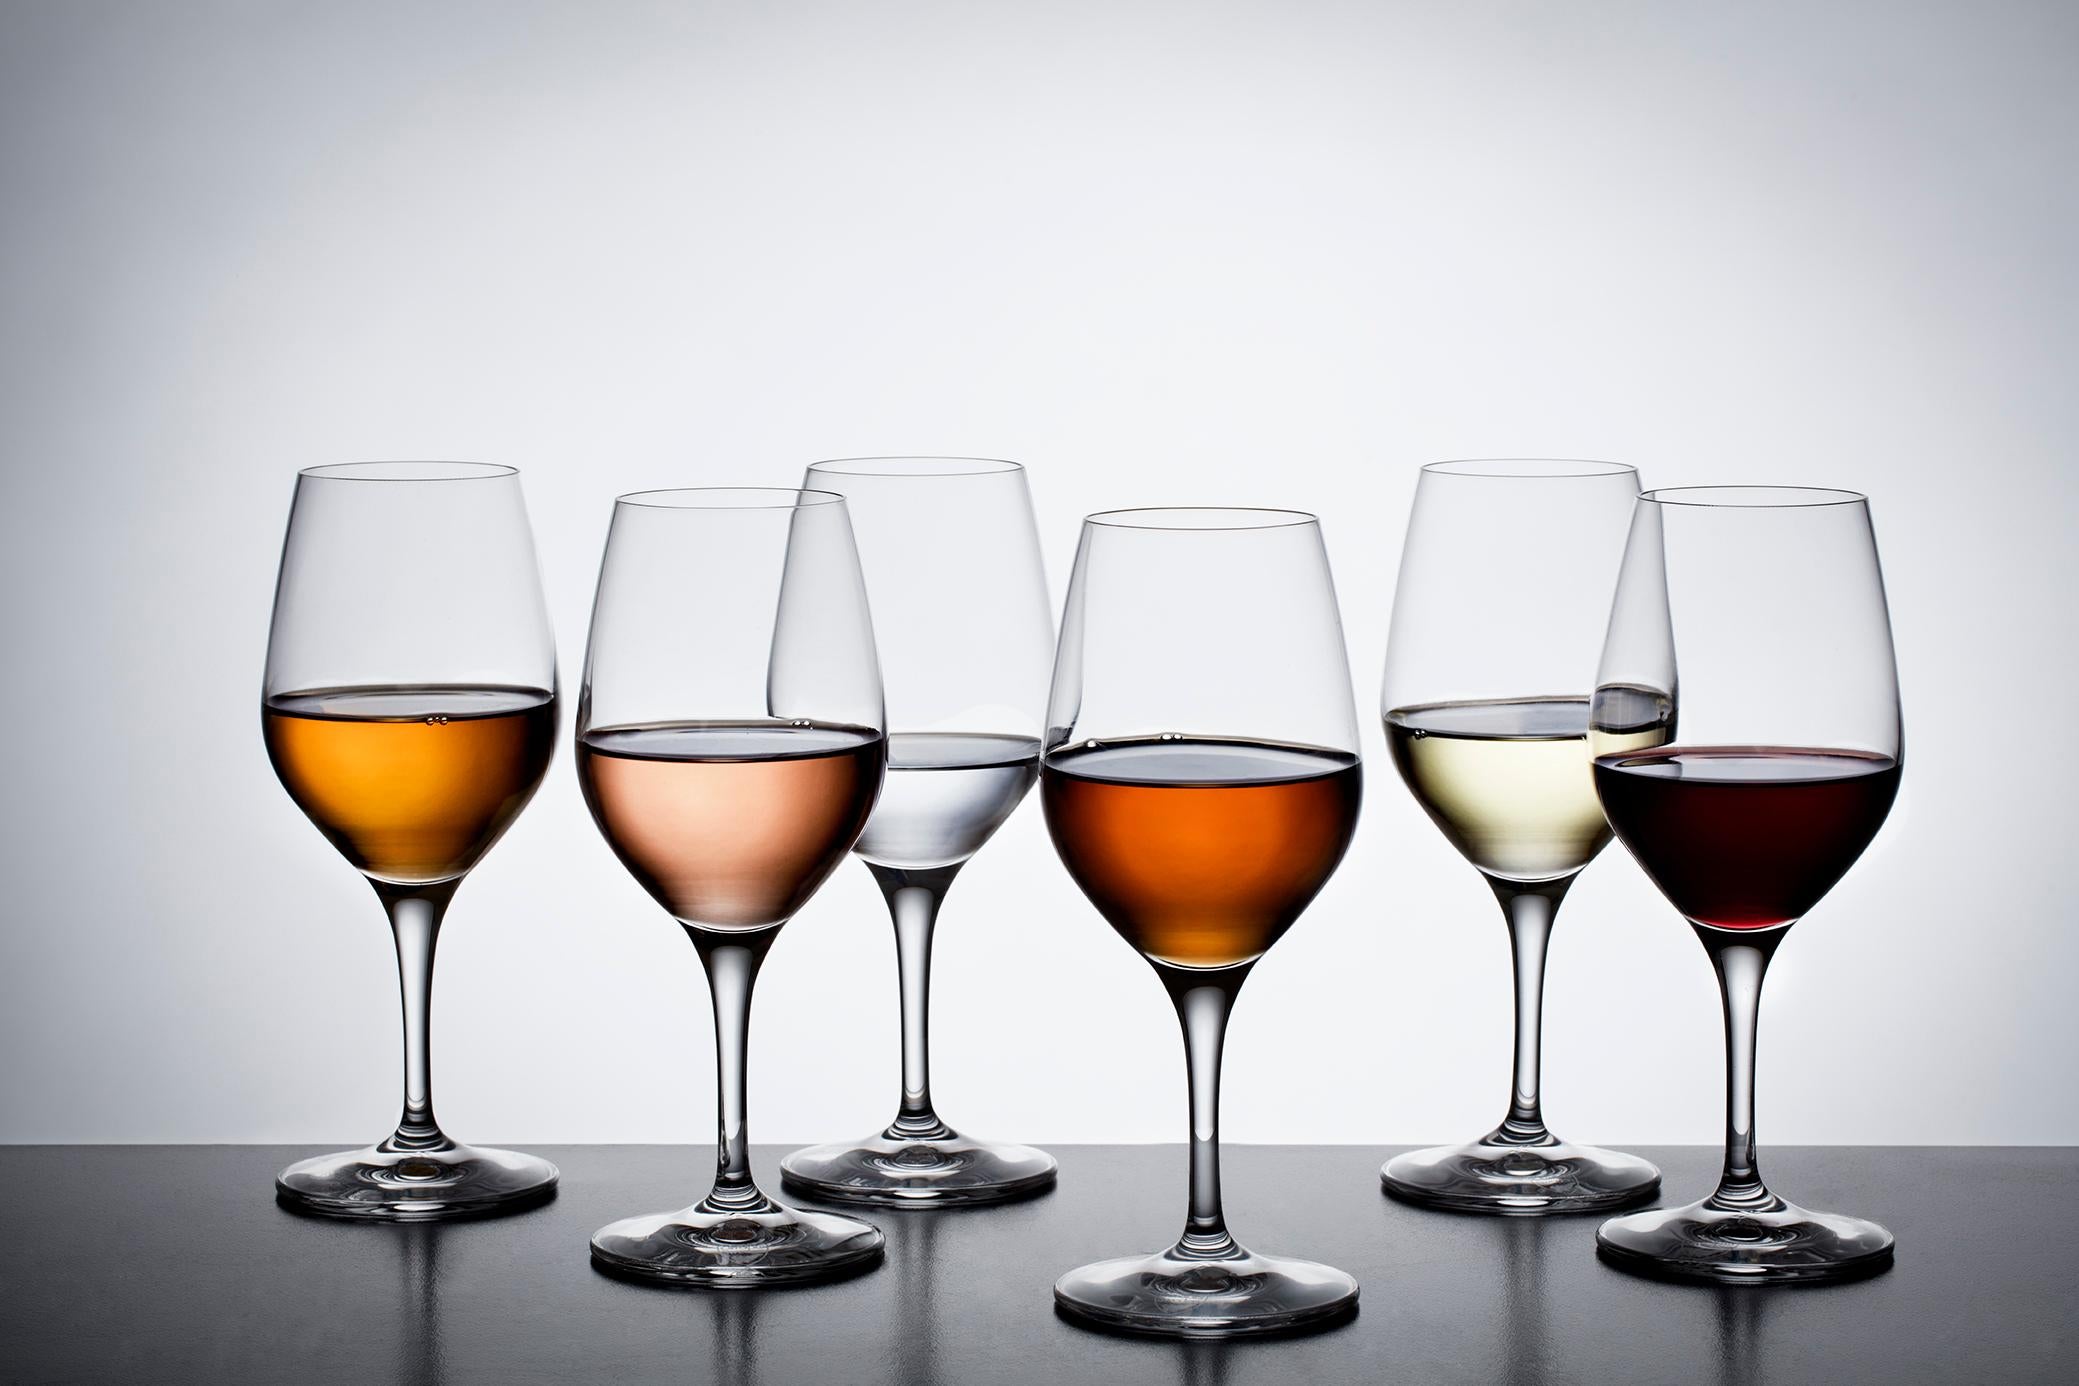 Sense Universal by Orrefors Designs, which holds 9.3 oz, is an all-purpose glass for all beverages, such as beer, wine, and non-alcoholic drinks.
